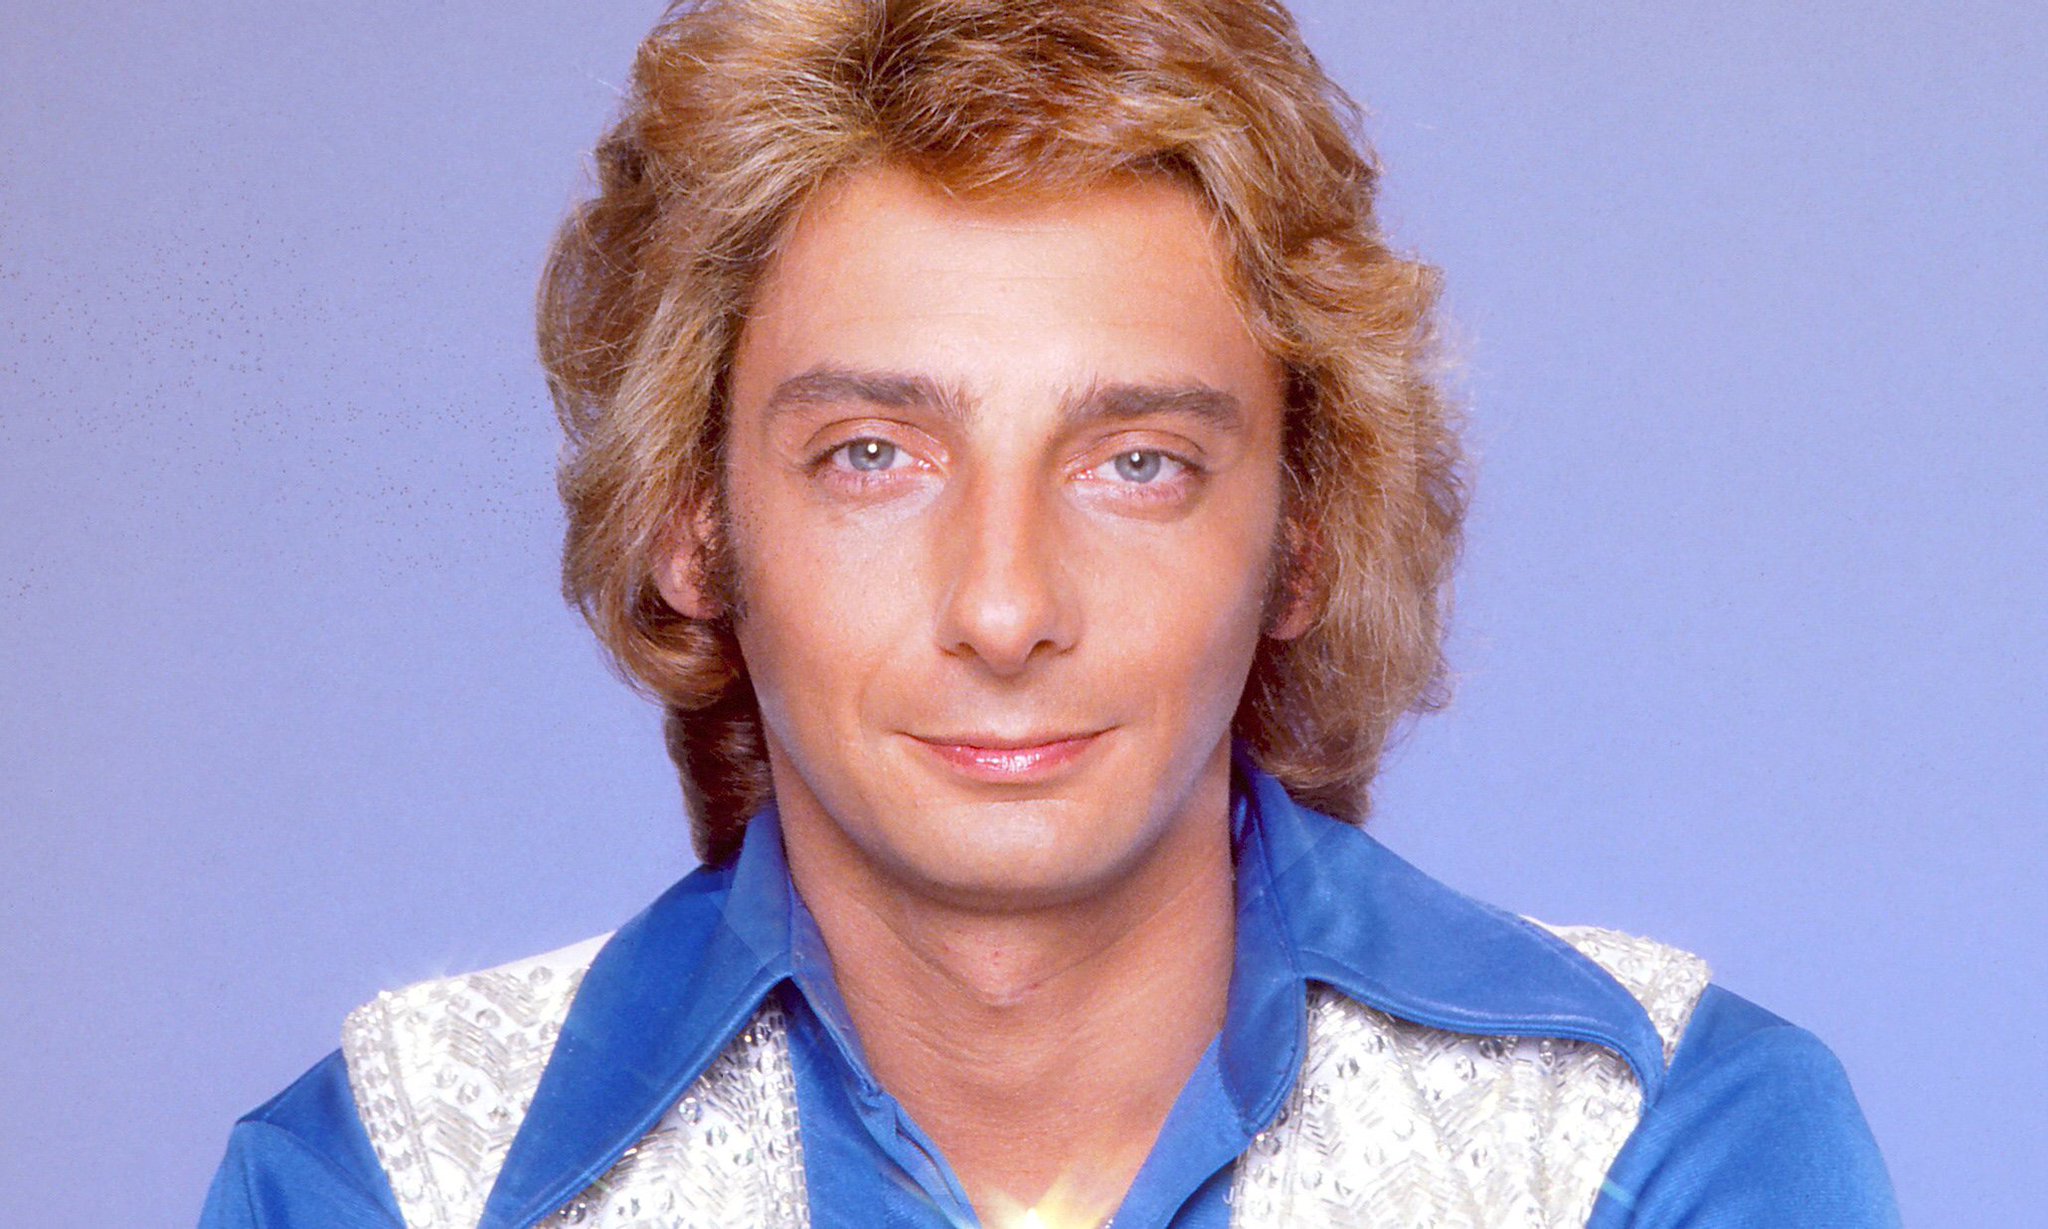 Big  to Barry Manilow, today in 1946! Have a day! 